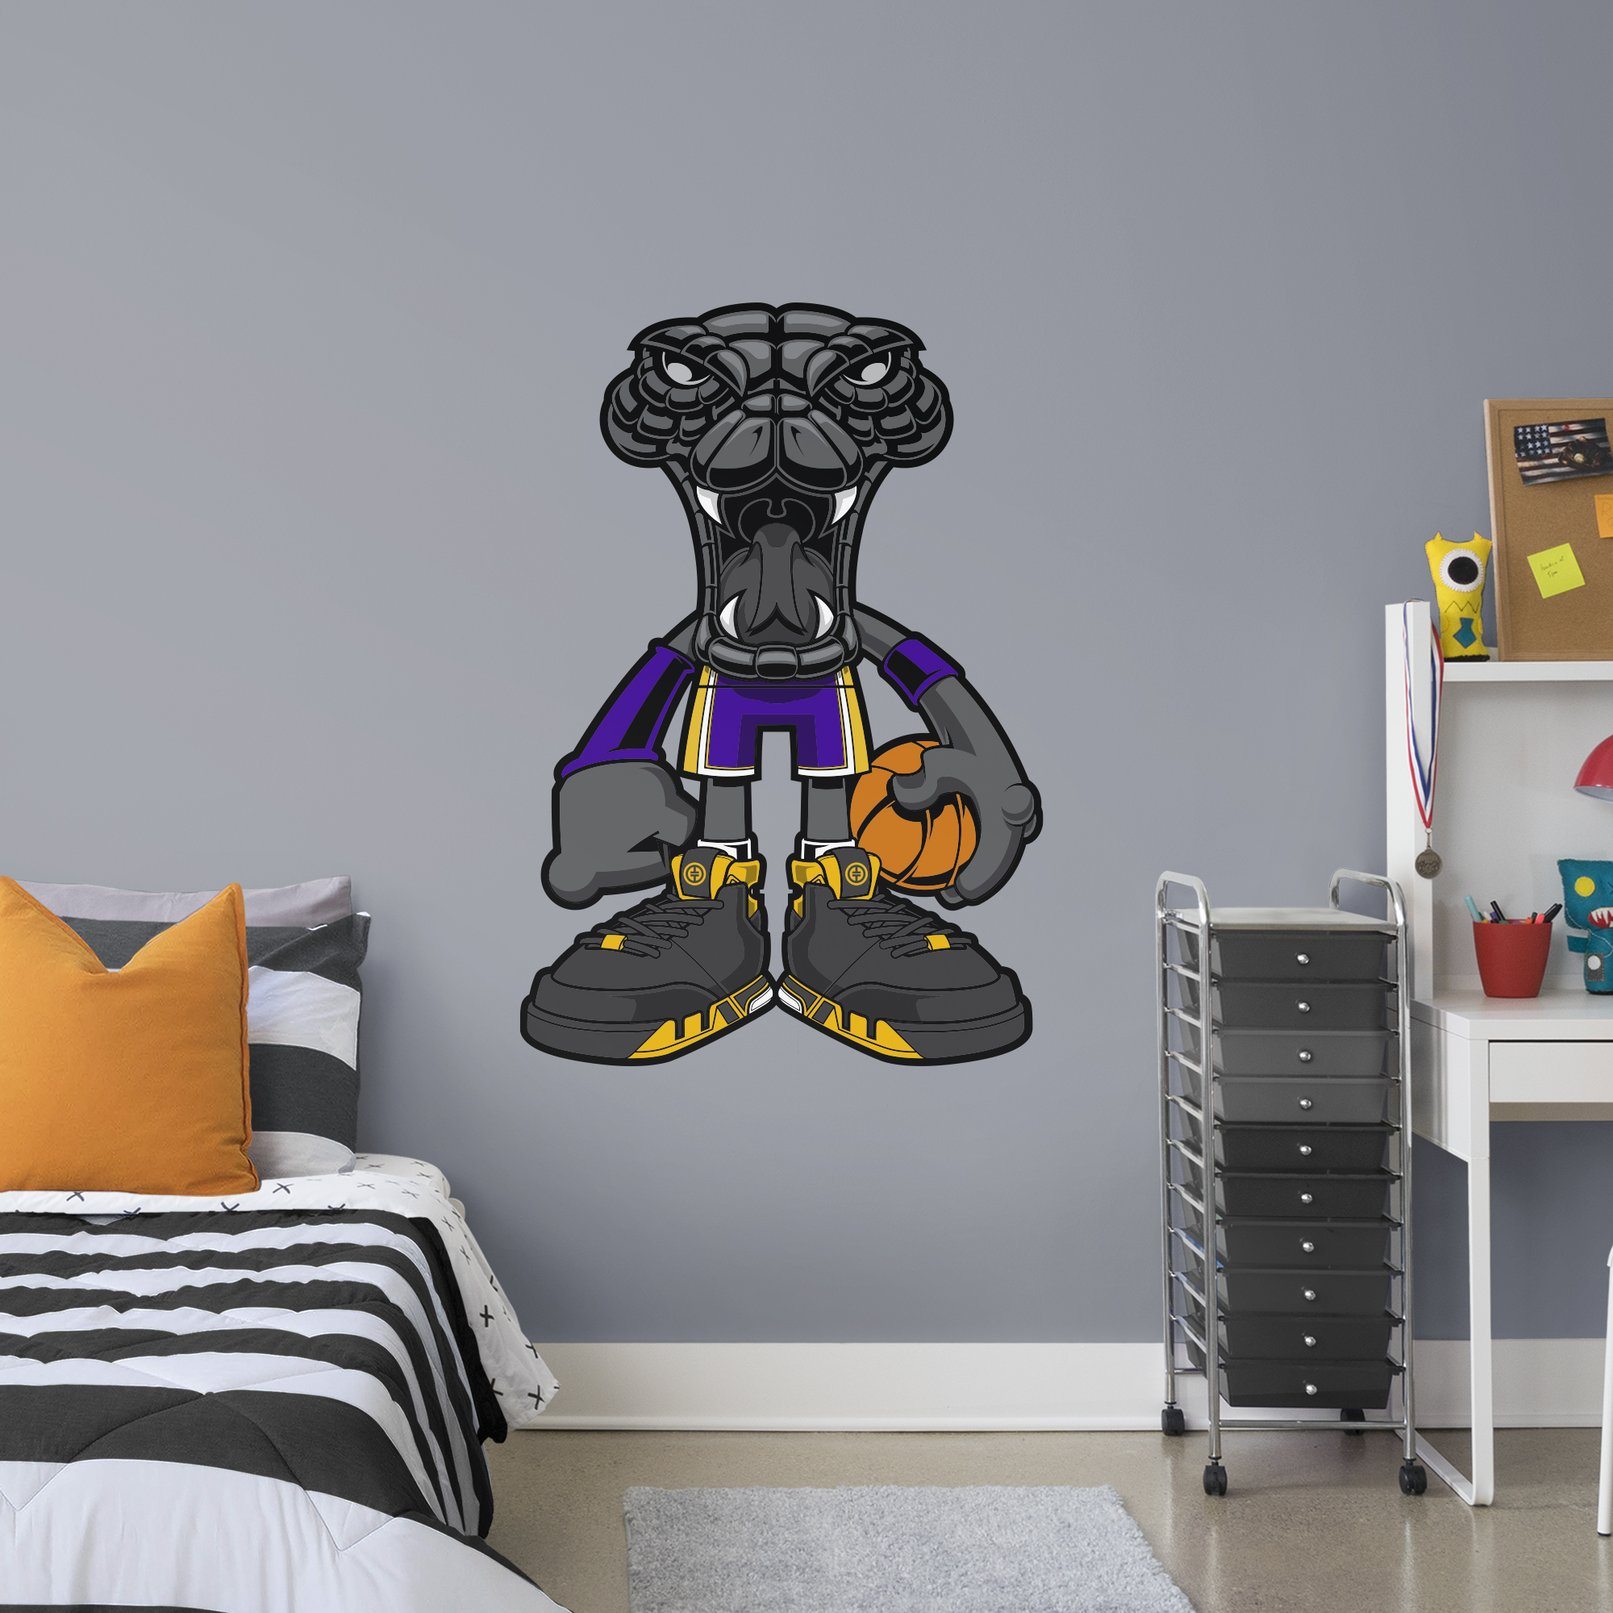 https://fathead.com/collections/tracy-tubera/products/mtt-102?variant=33197950238808